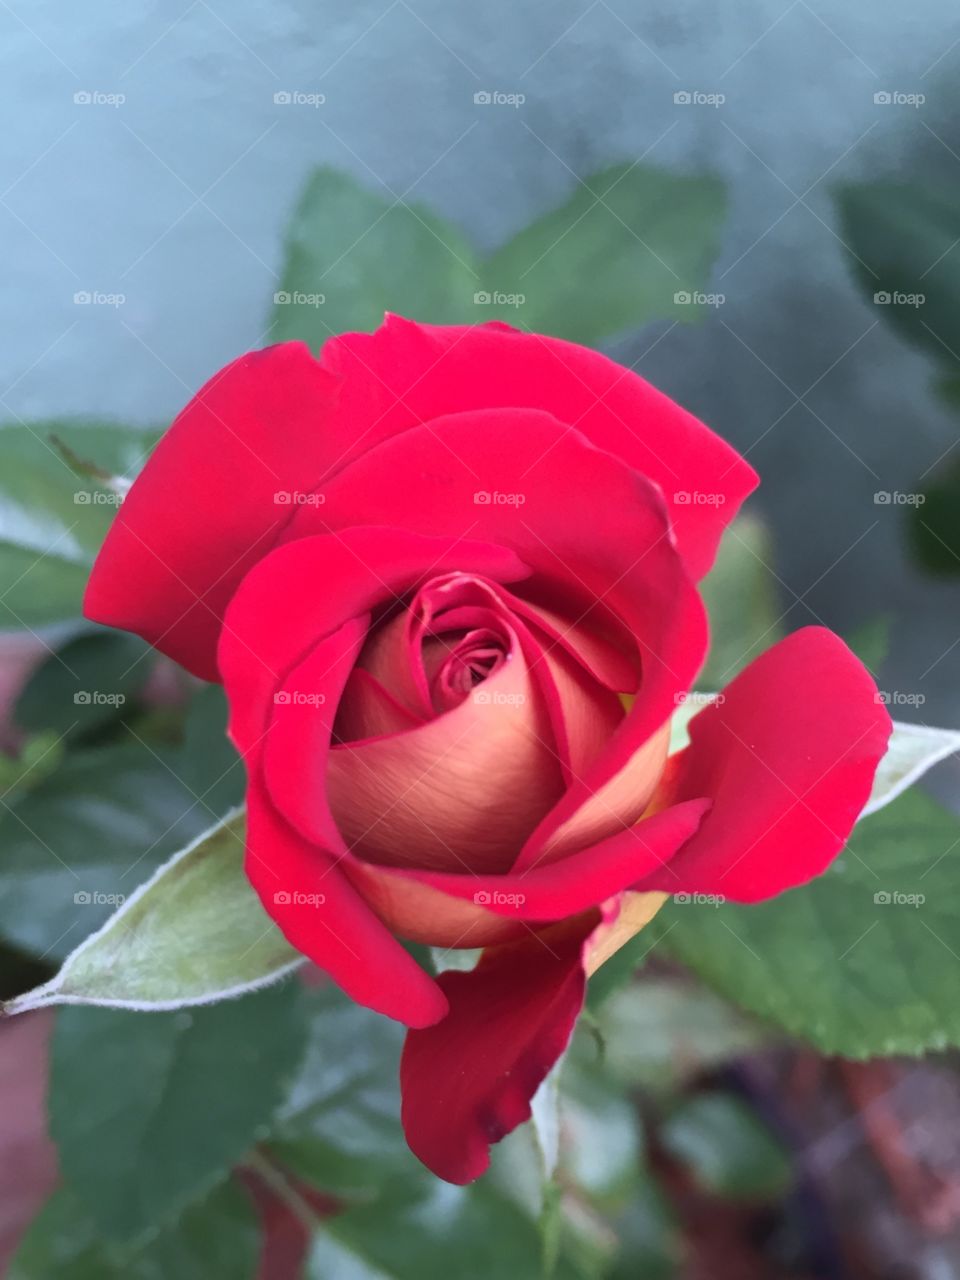 Rose bud ready to open.